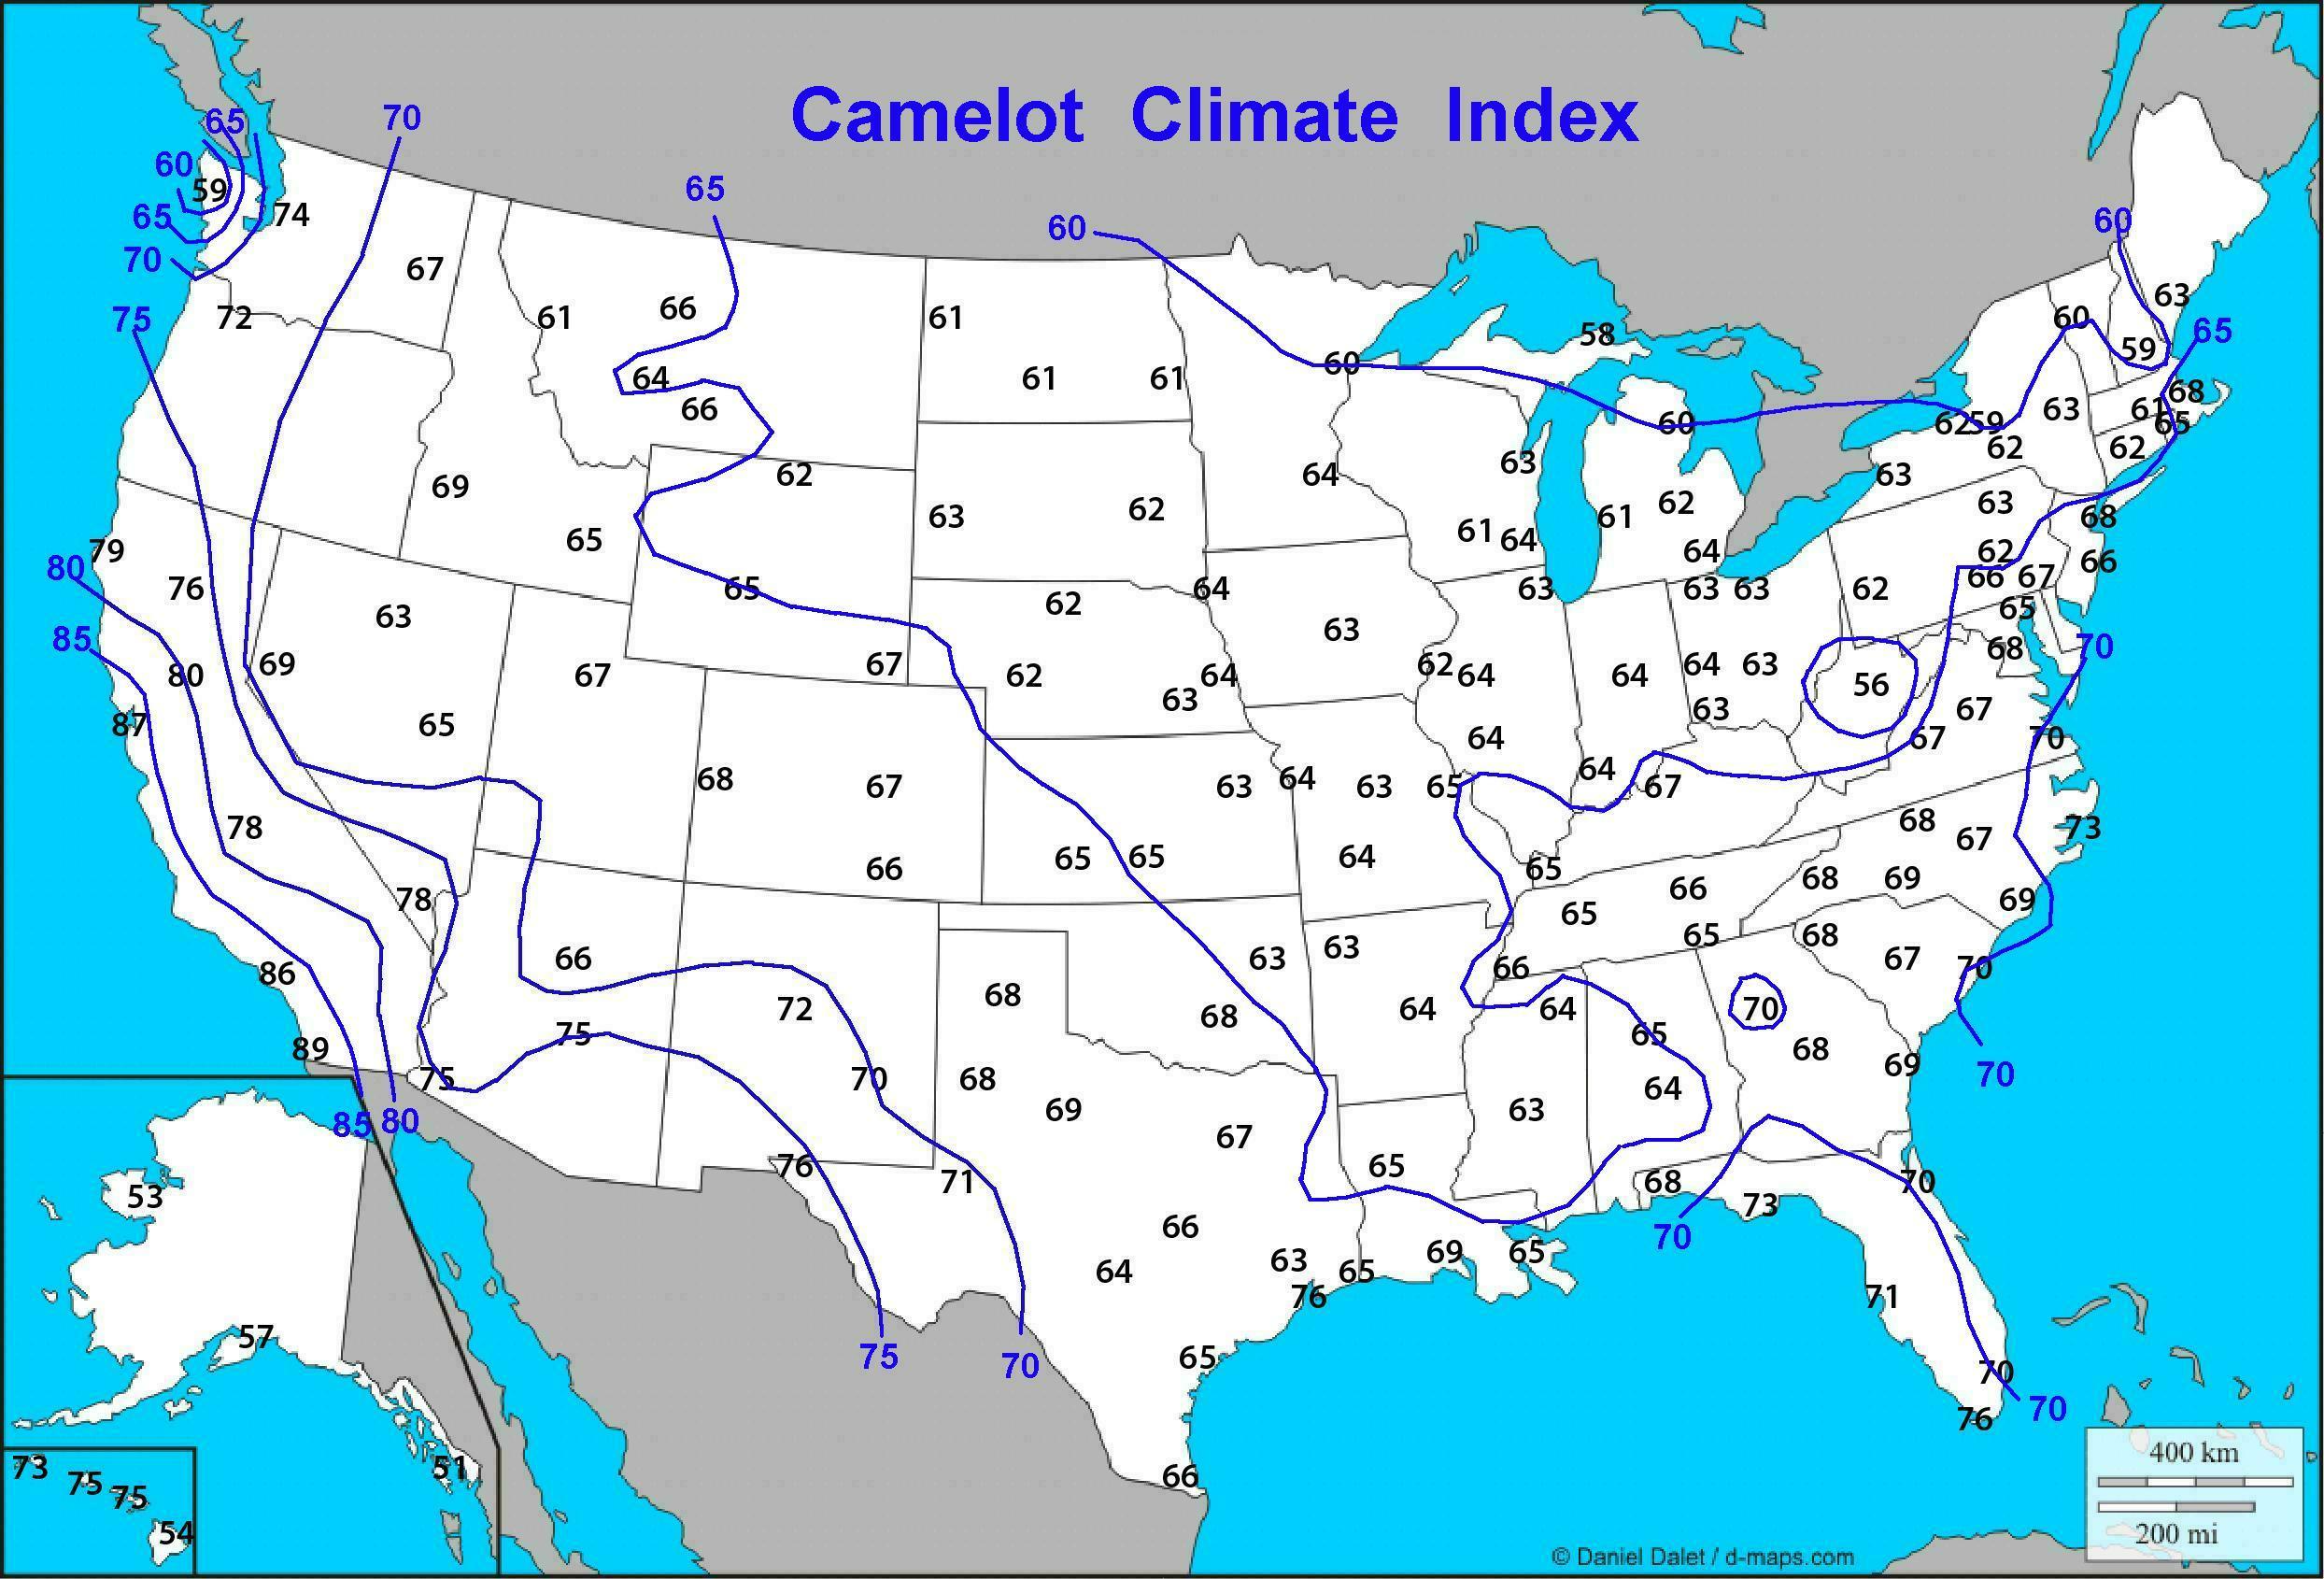 Camelot Climate Index